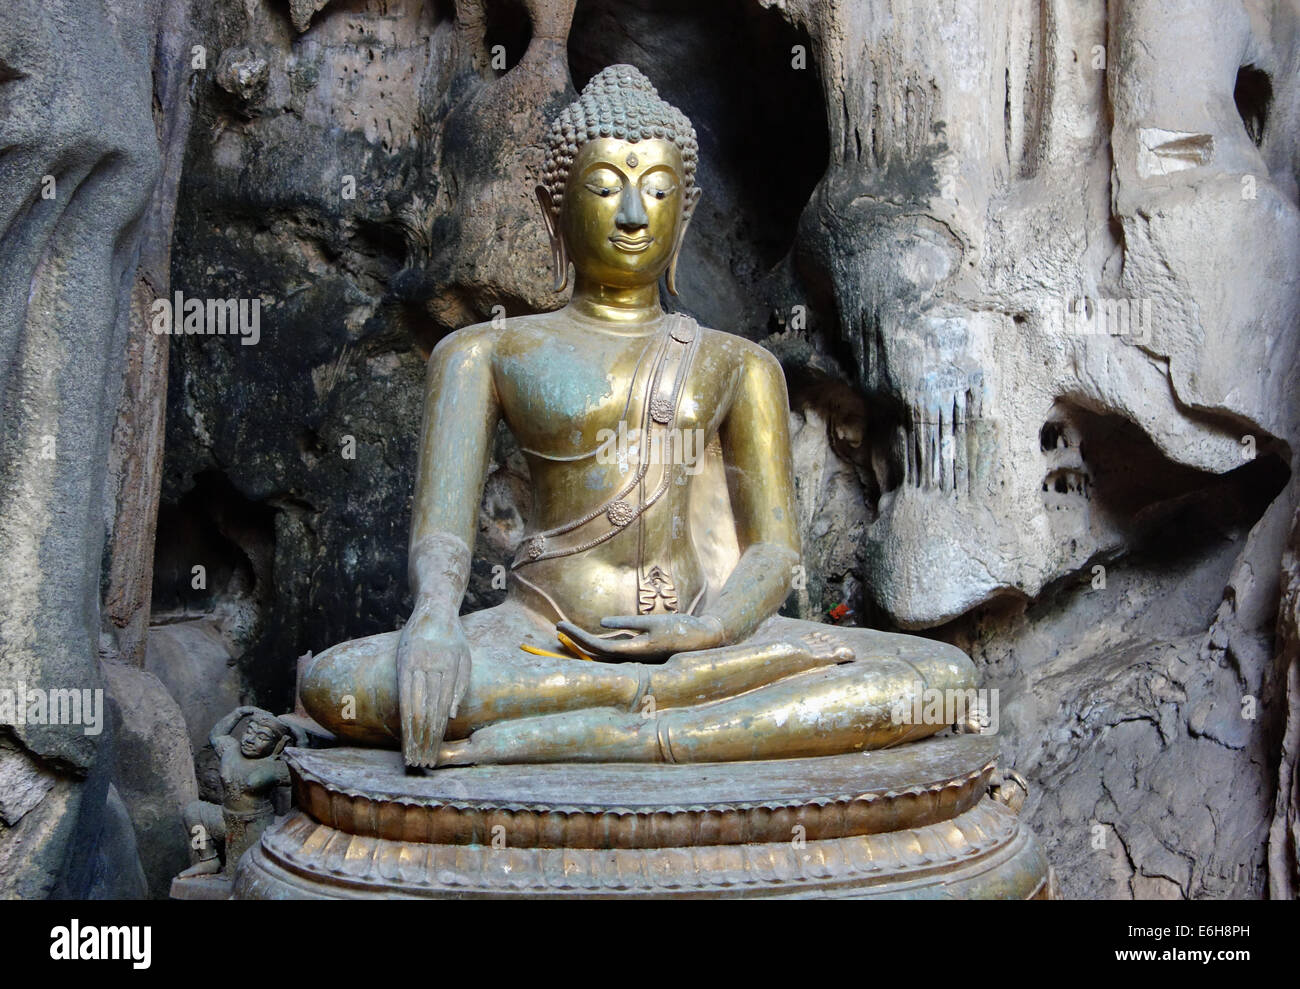 Messing Buddha-Statue in der Höhle Stockfoto